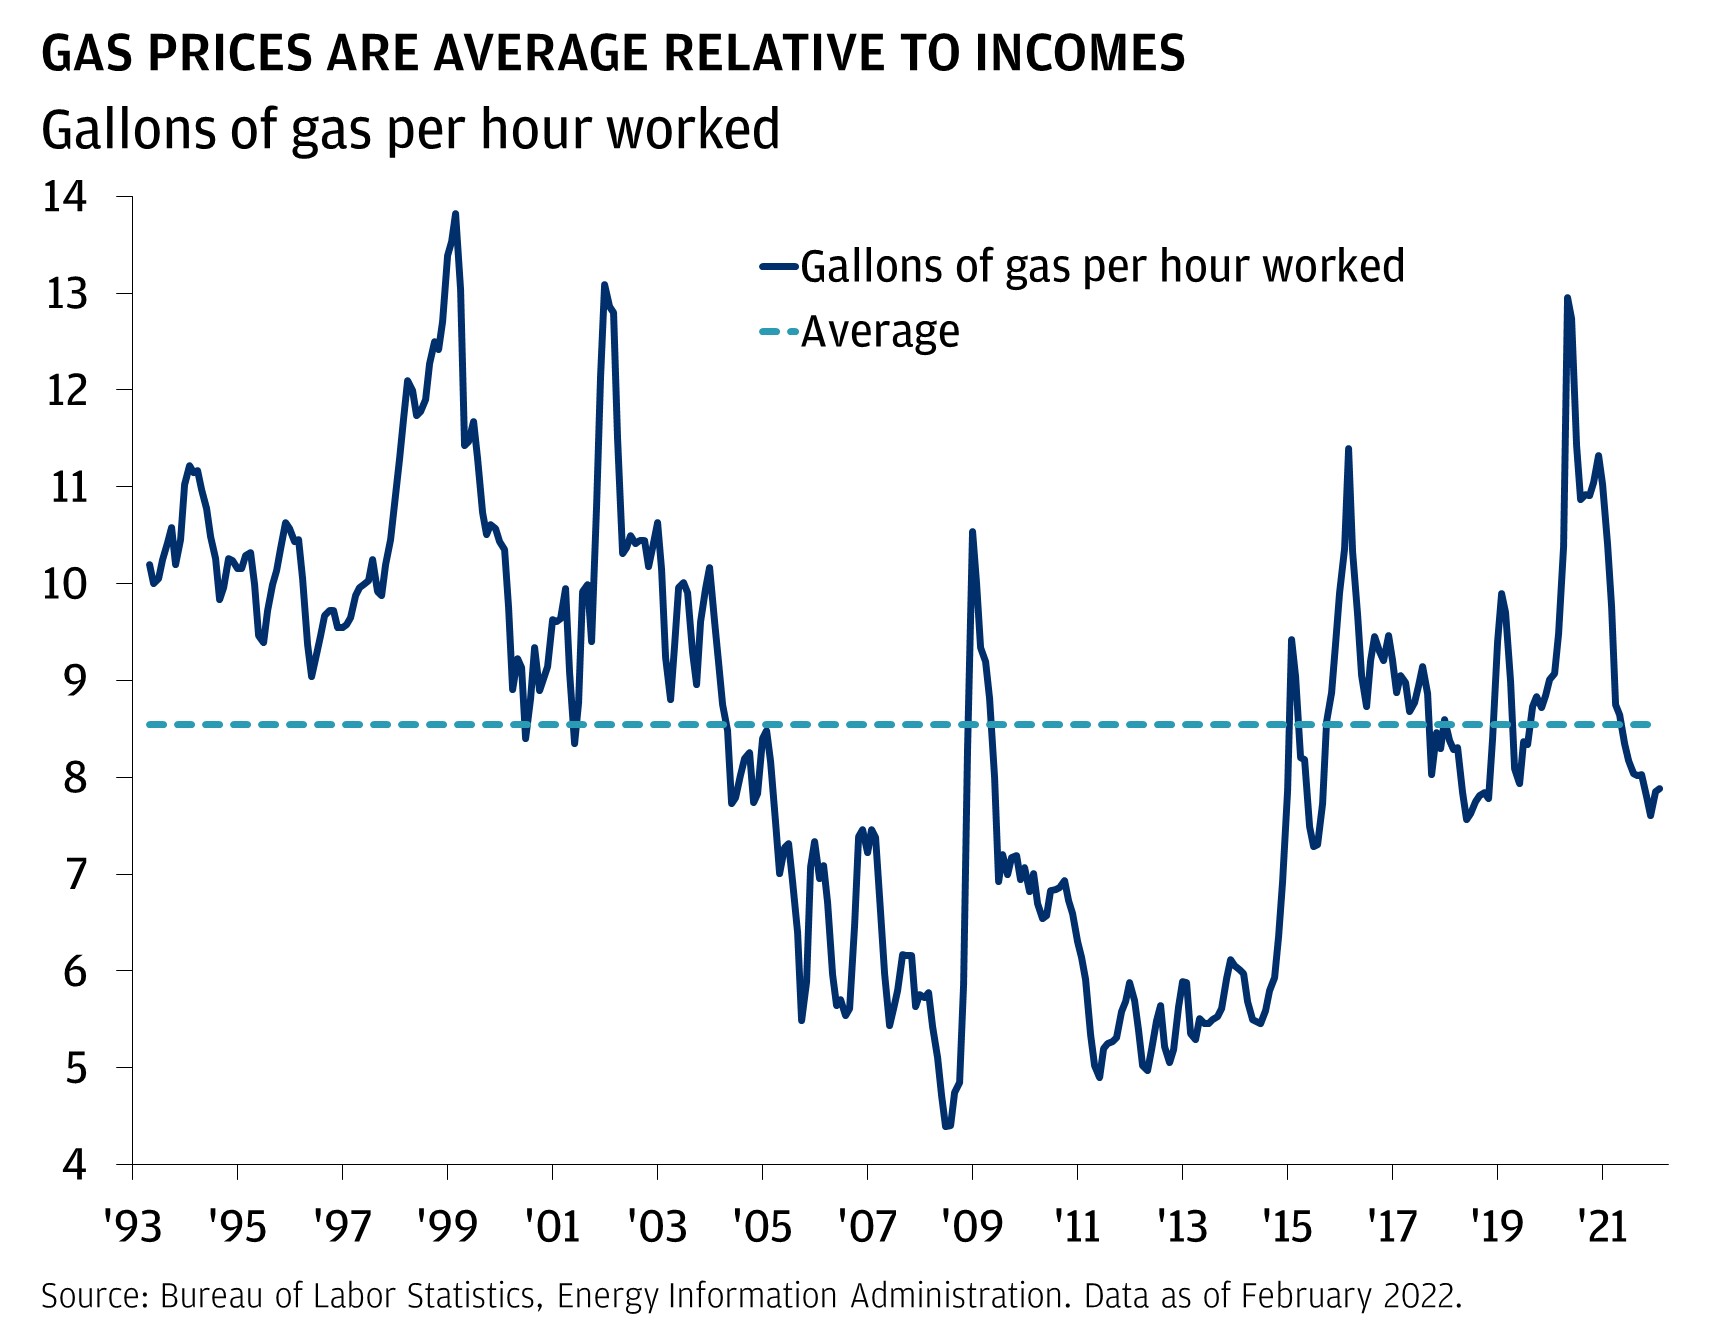 This chart shows the gallons of gas per hour worked, from April 1993 to January 2022. GAS PRICES ARE AVERAGE RELATIVE TO INCOMES.